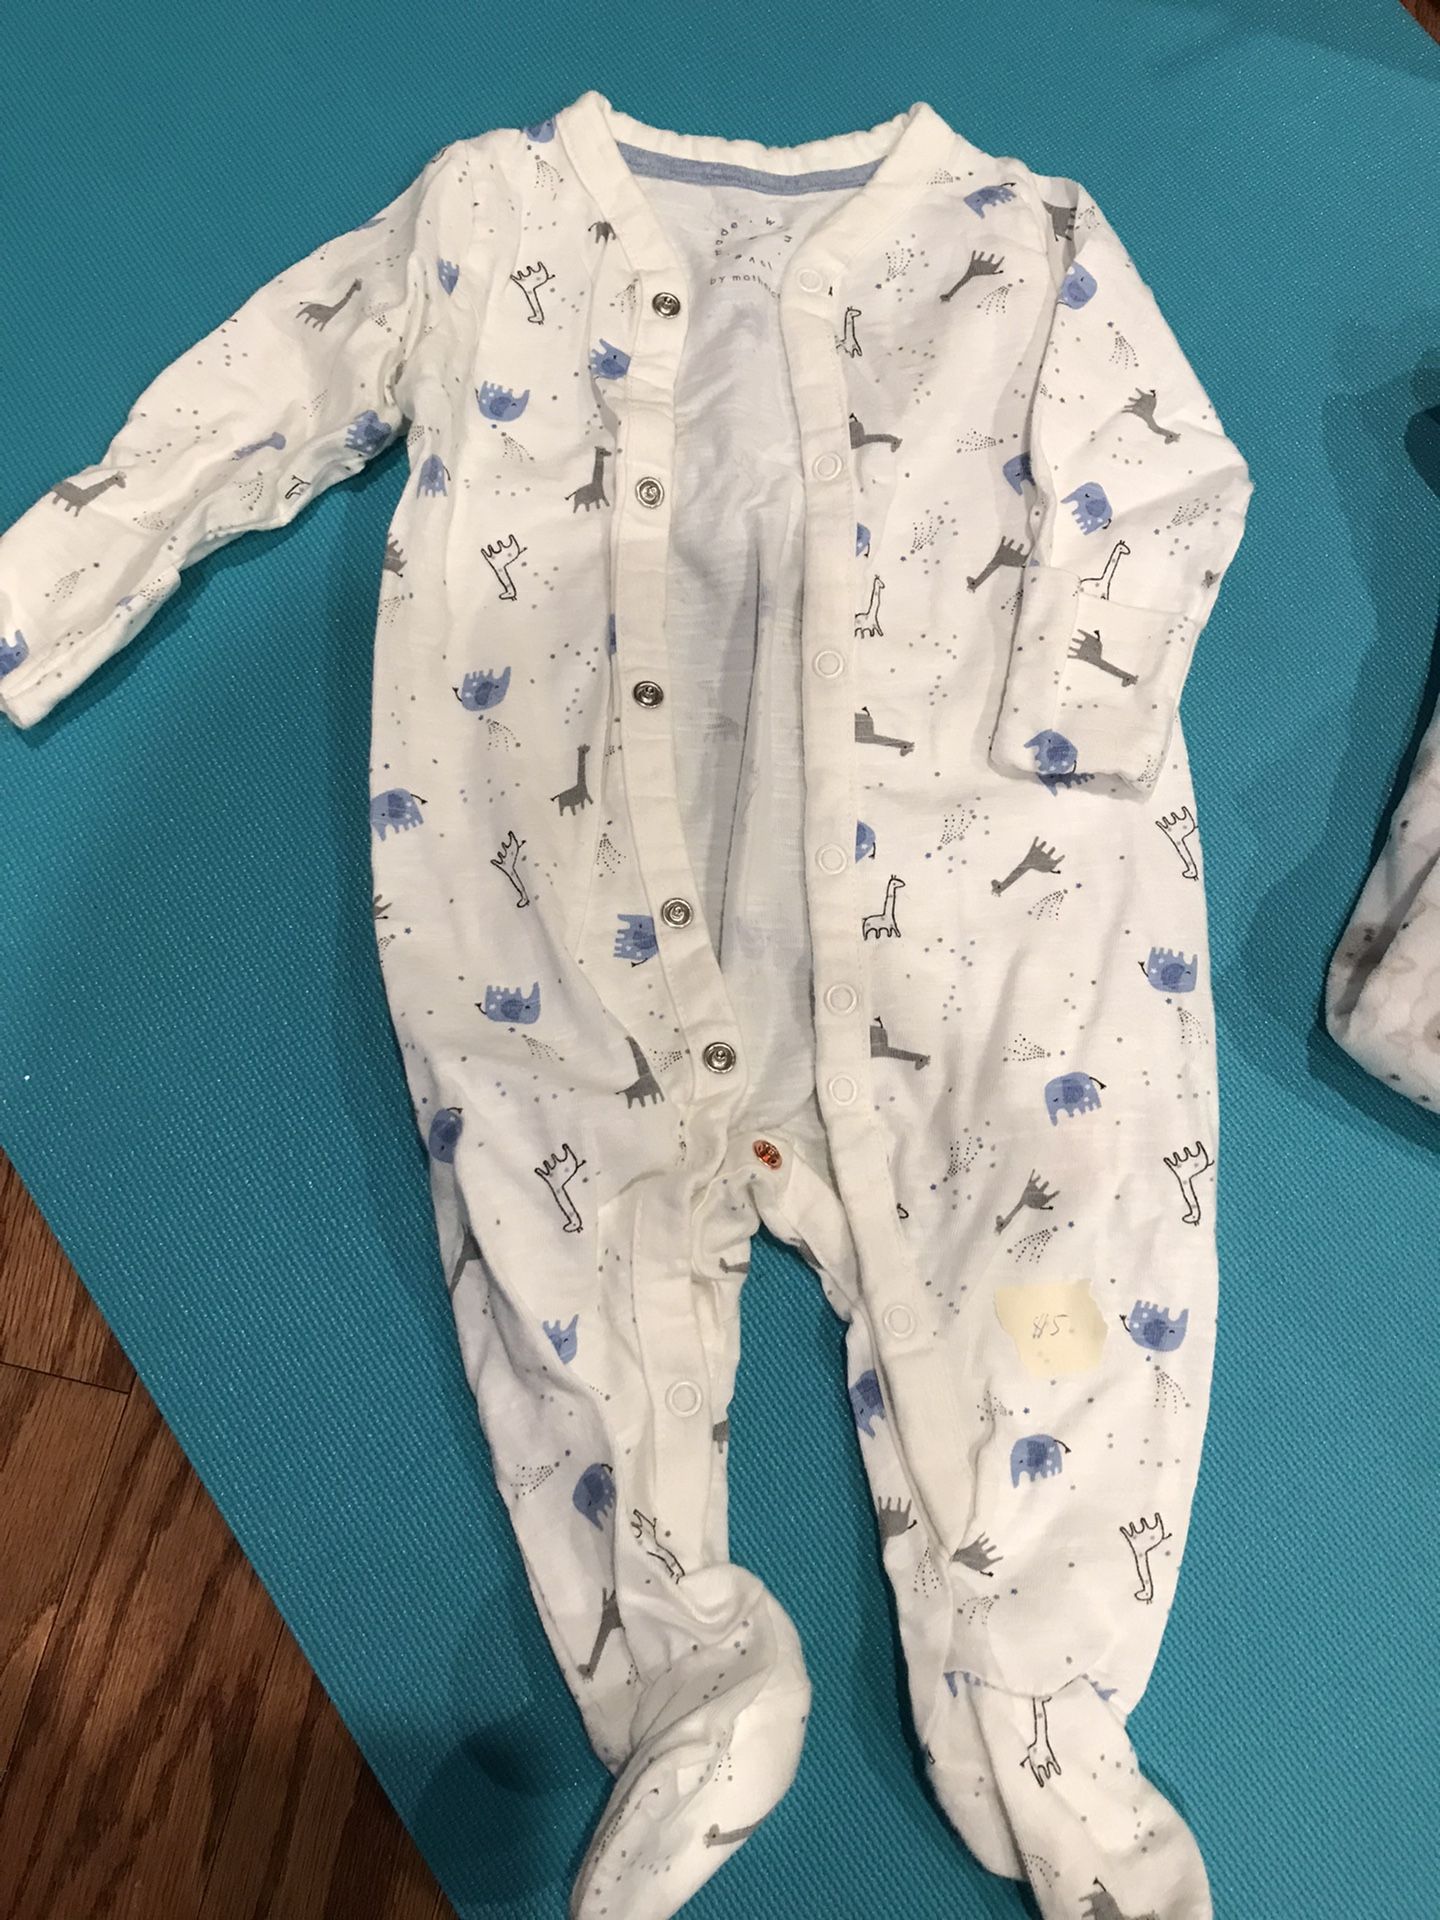 Long Sleeve Baby Boy Bodysuits Size 6 Months